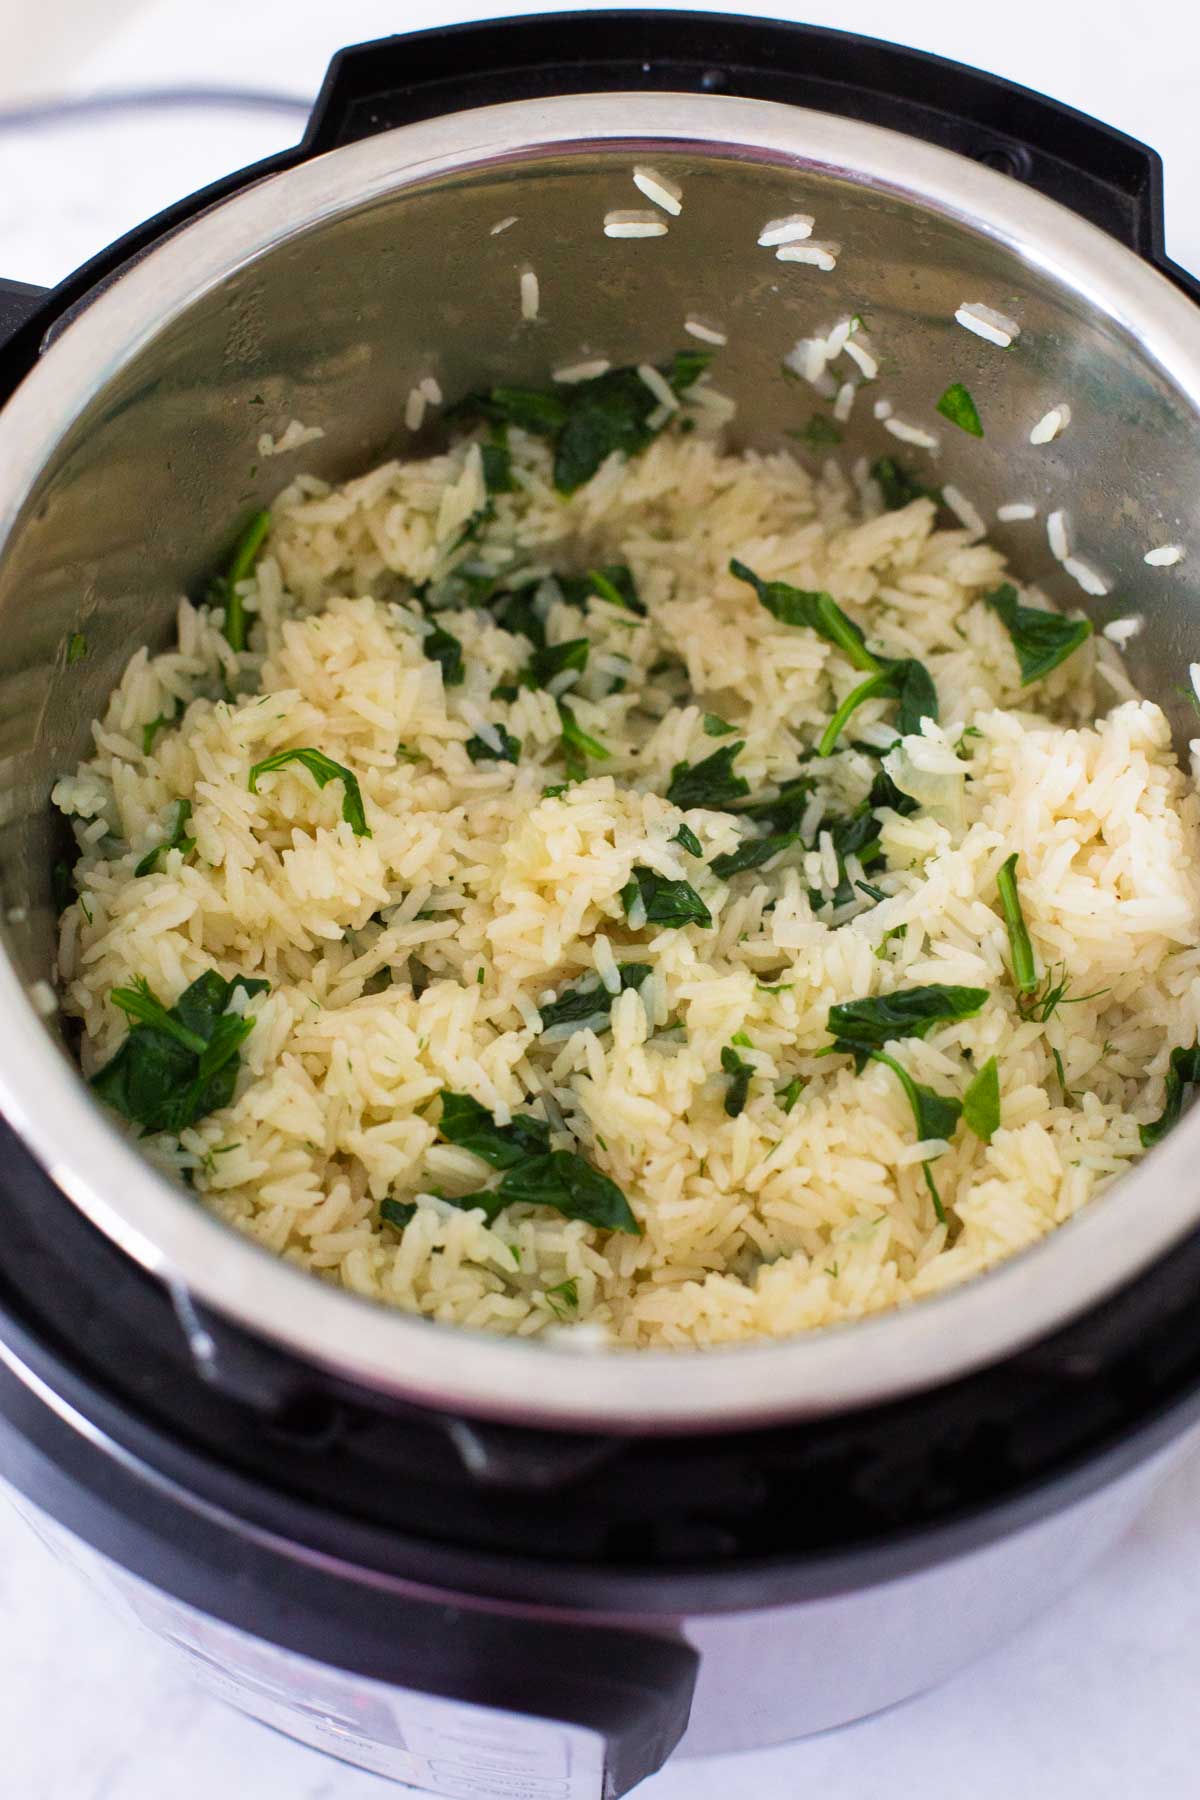 The spinach mixture has been stirred into the cooked rice inside the Instant Pot.